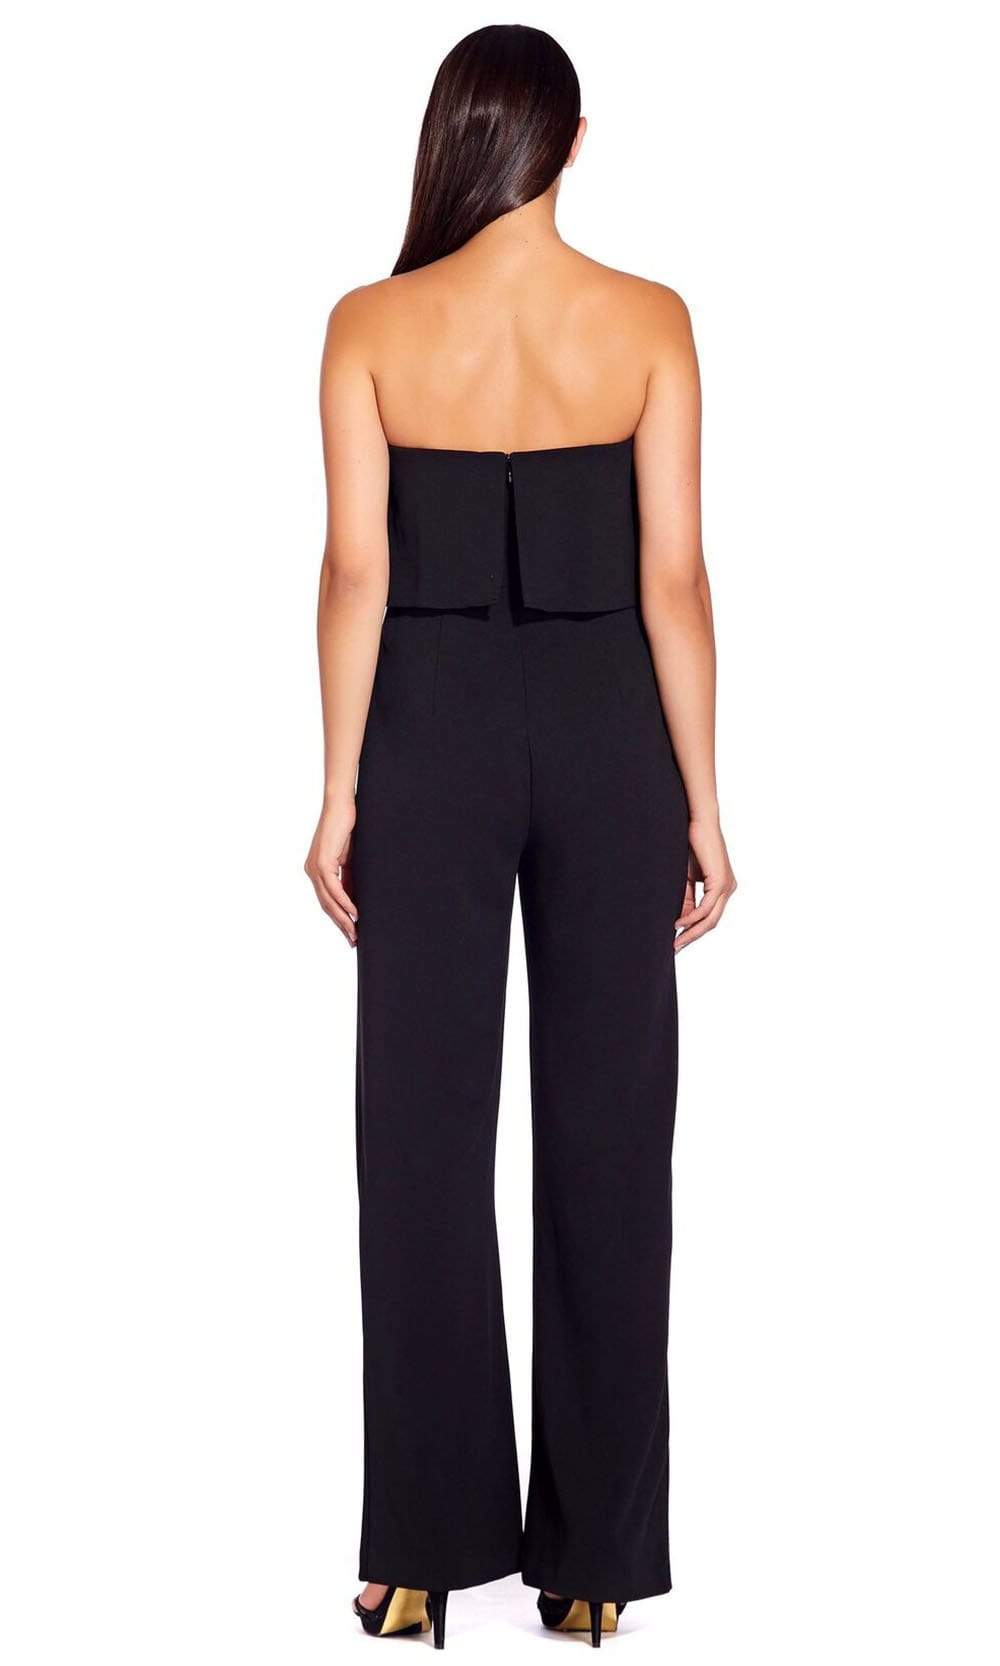 Adrianna Papell - AP1E206916 Strapless Flounce Bodice Crepe Jumpsuit Special Occasion Dress